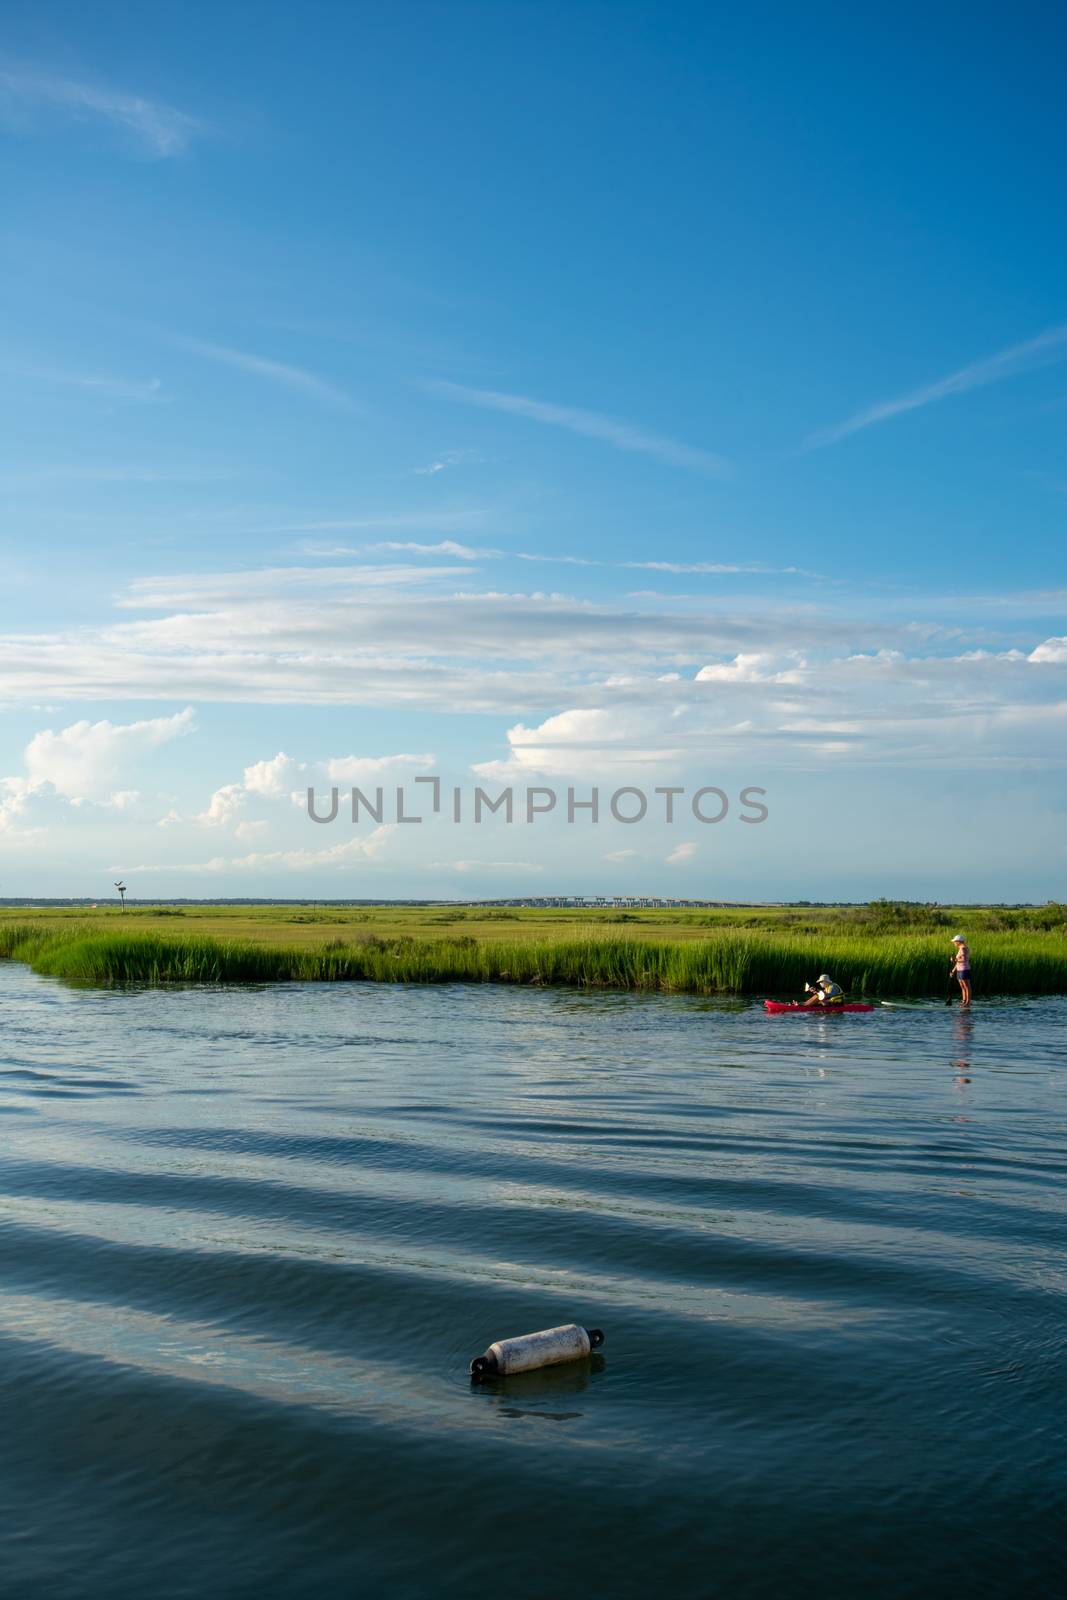 Women on a Kayak and a Canoe Slowly Riding Through the Bay With Gorgeous Greenery and a Clear Blue Sy Behind Them